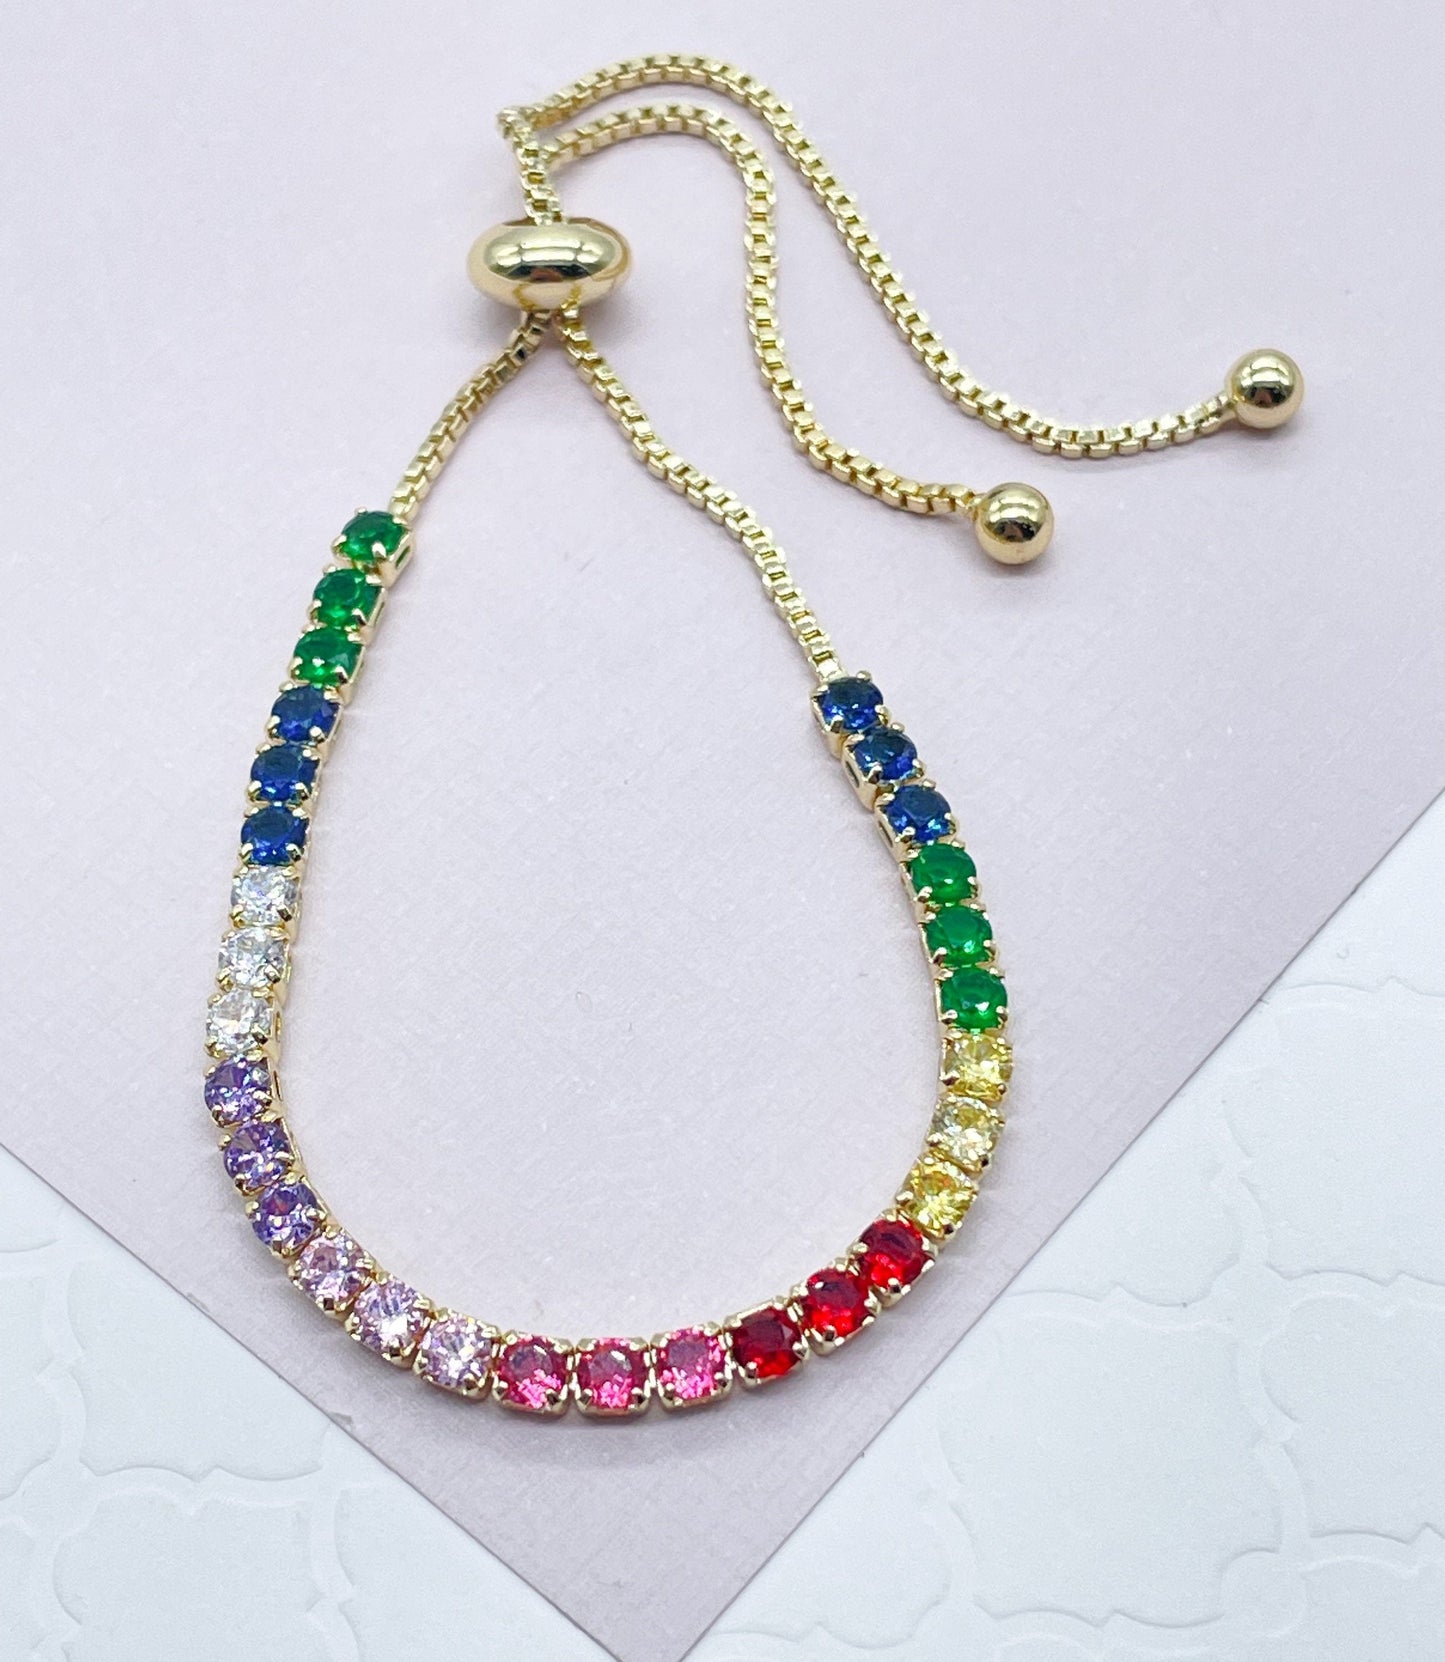 18k Gold Layered Colorful Cubic Zirconia Adjustable Bracelet , Arm Candy Jewelry,